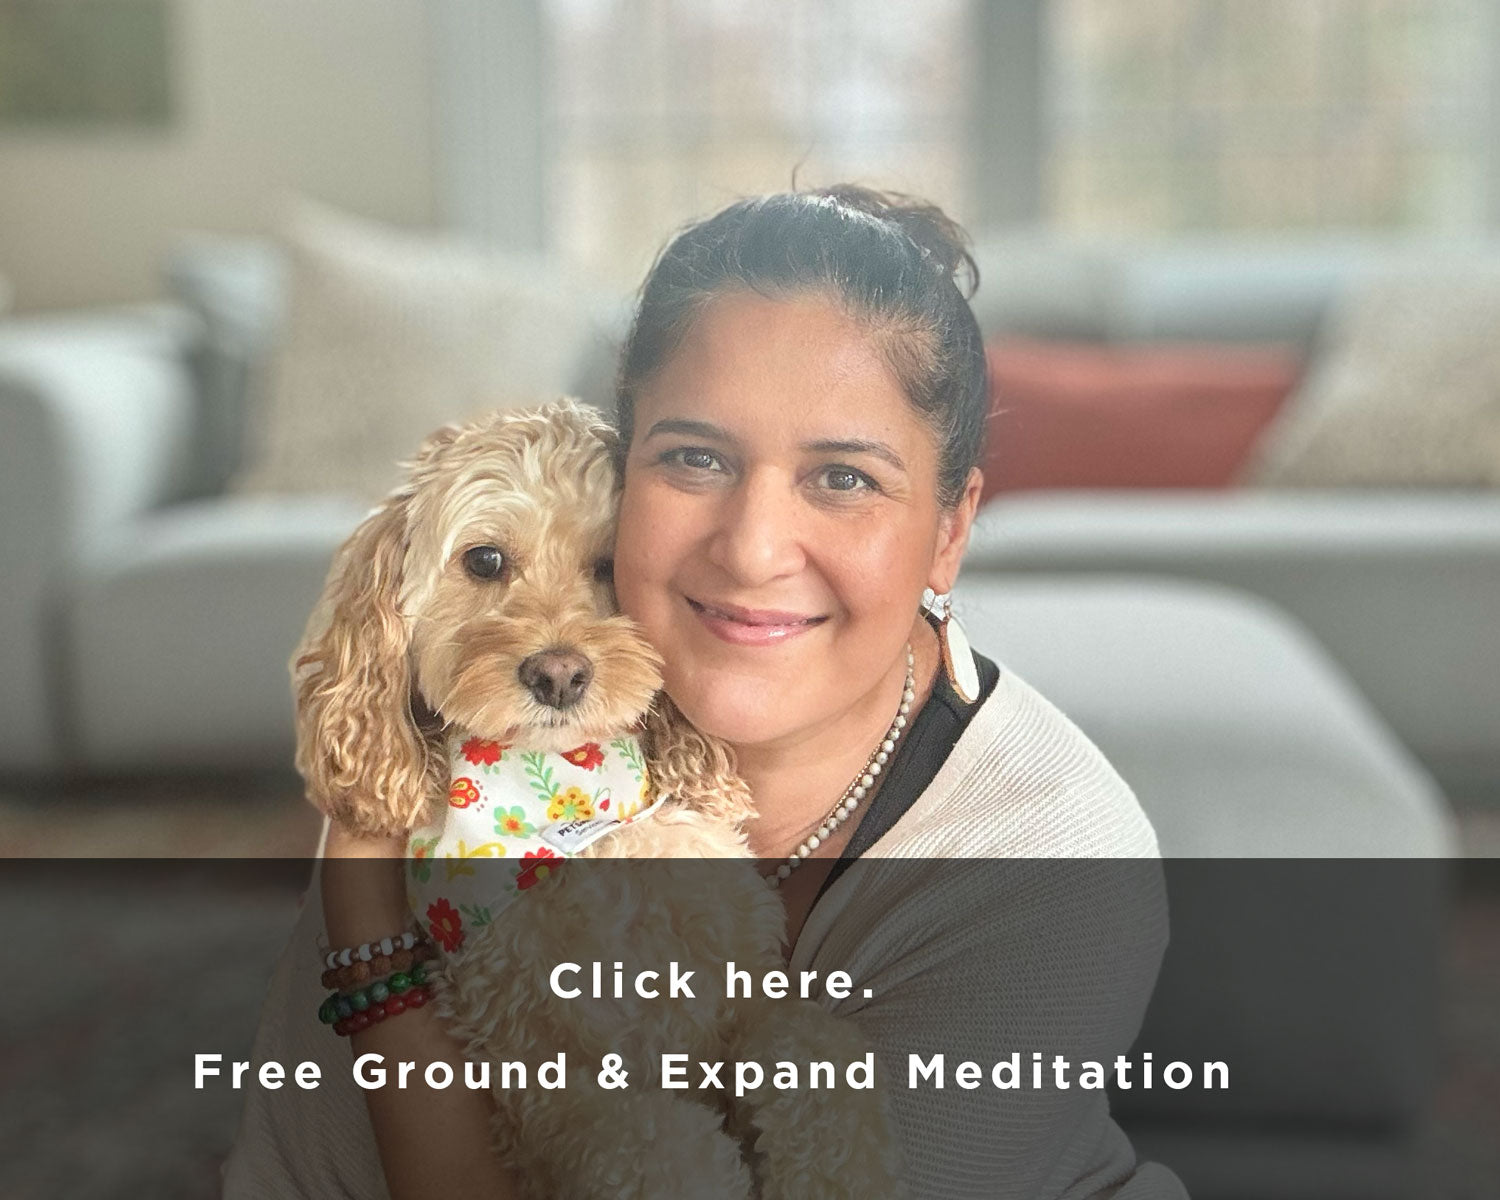 Your access to freedom. Download the free meditation today. www.MiteraCoaching.com